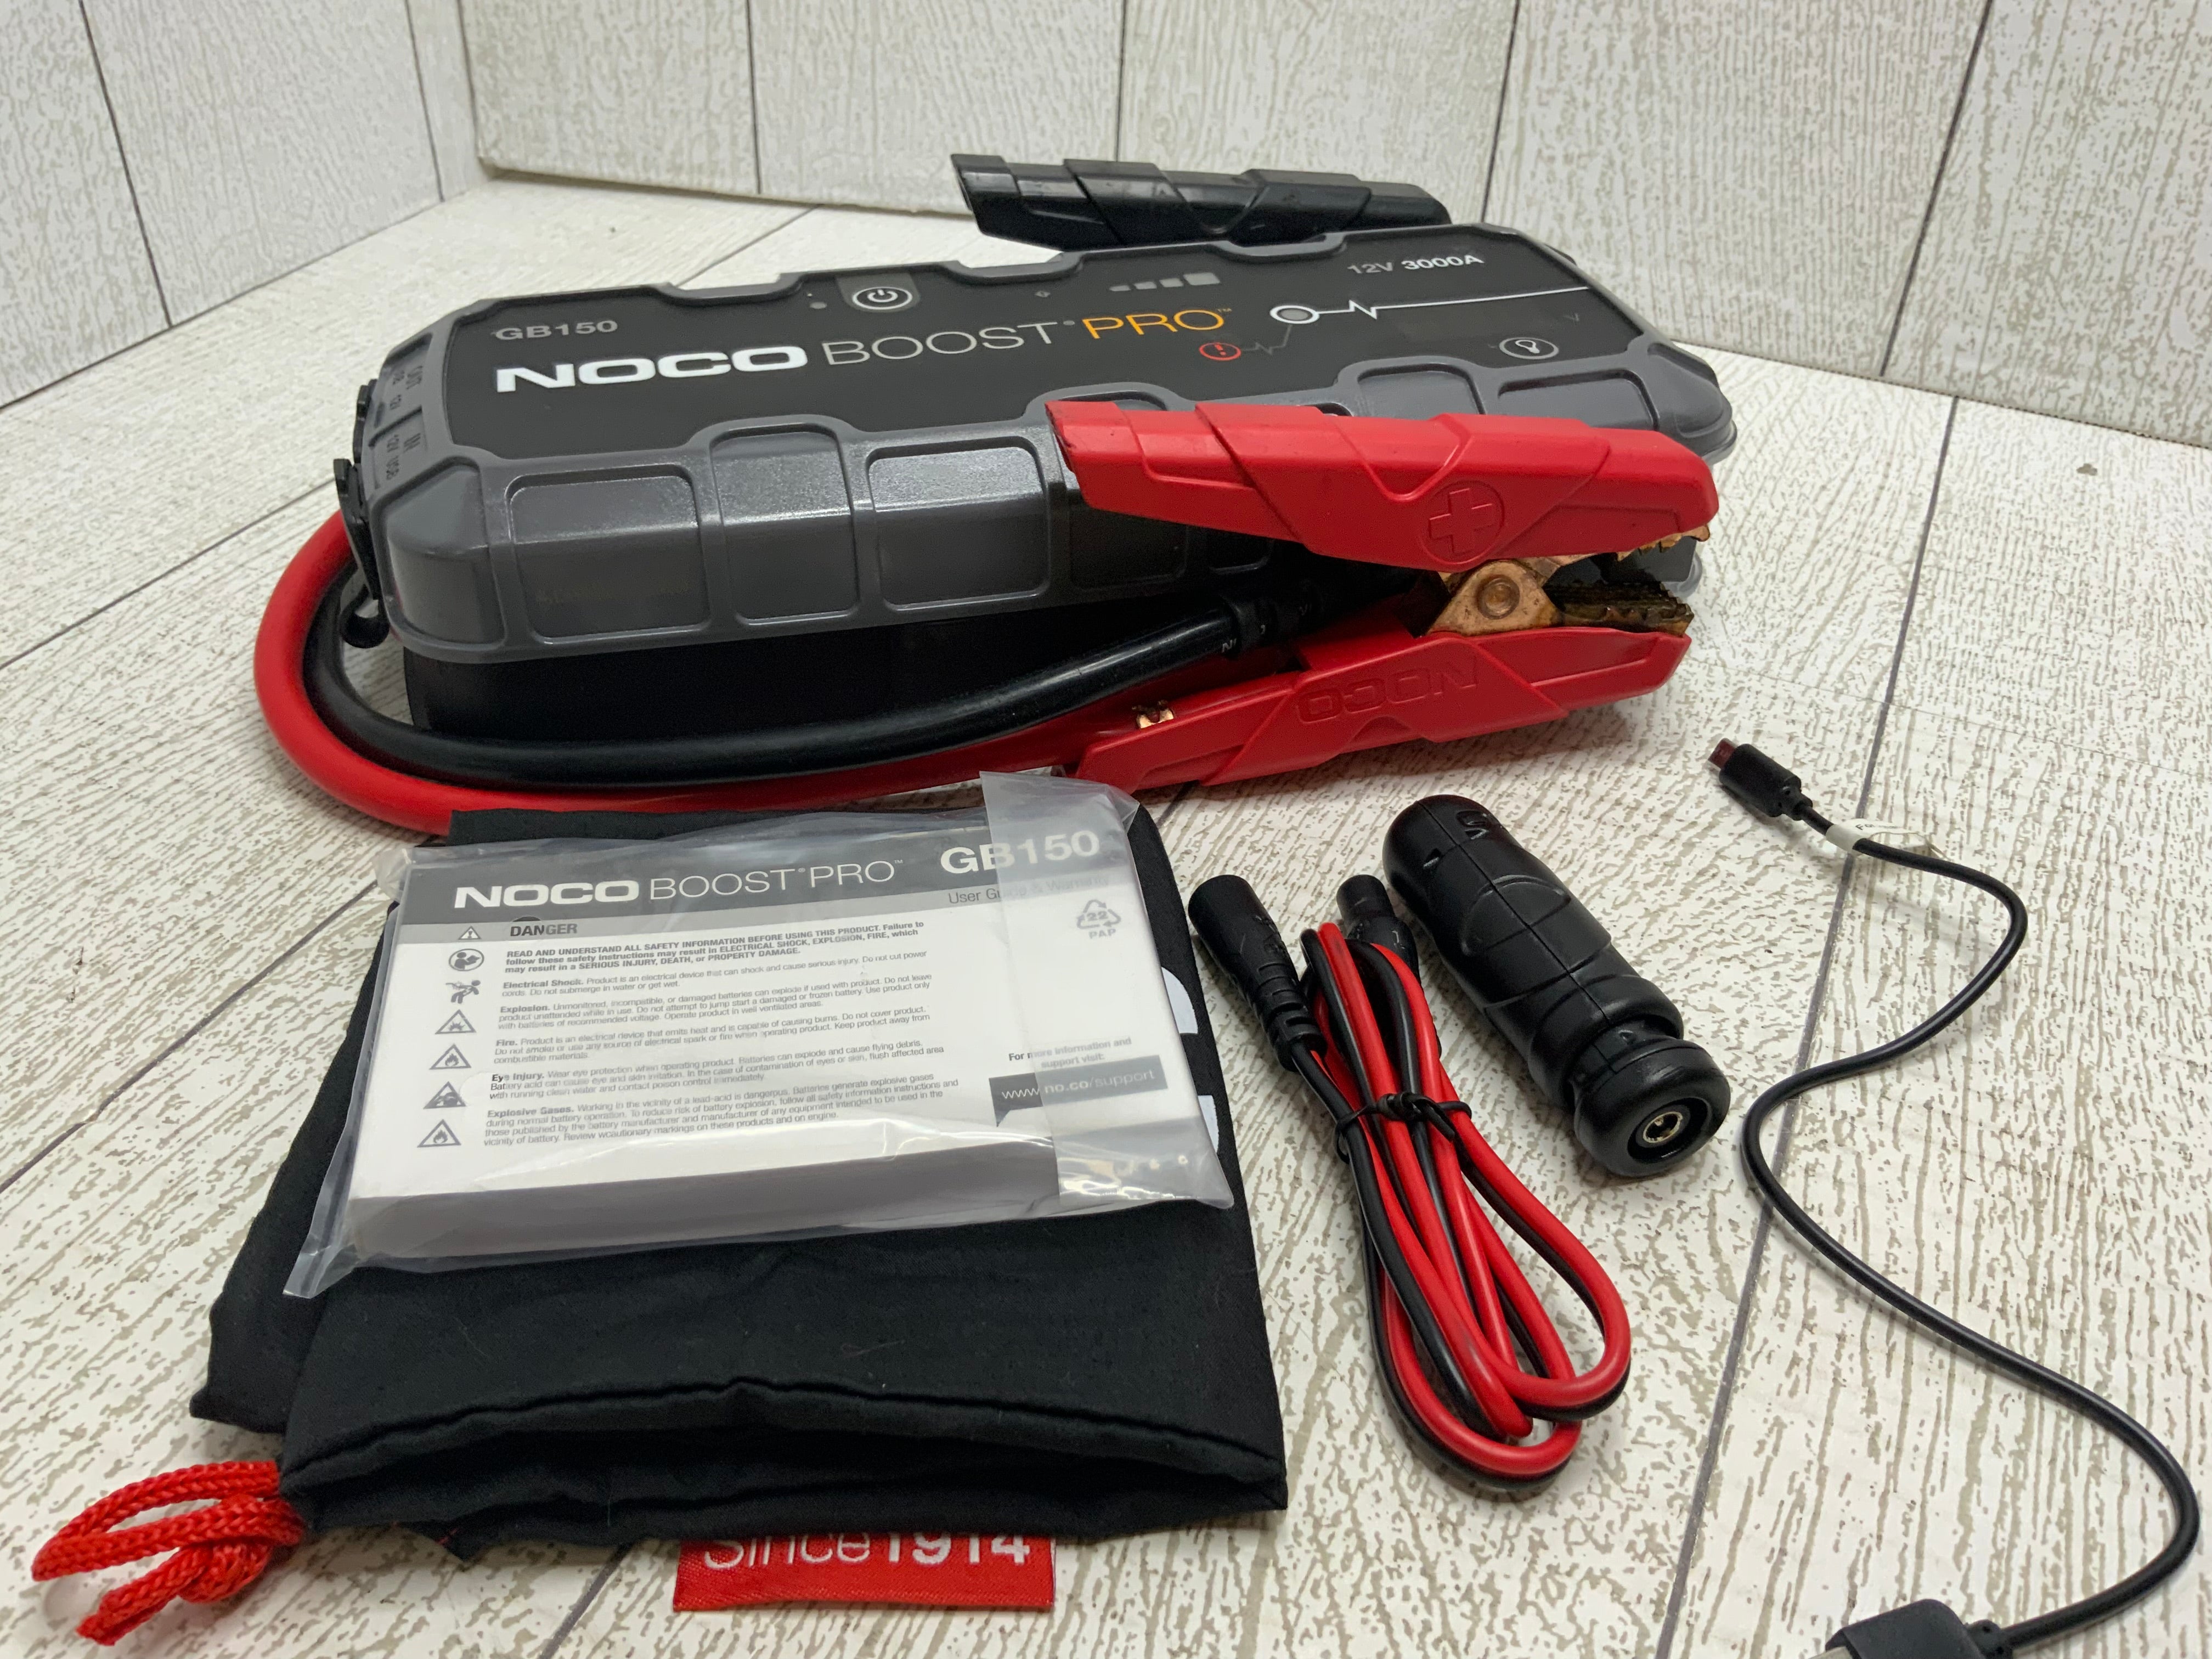 NOCO Boost Pro GB150 3000 Amp 12-Volt Lithium Jump Starter Box **FOR PARTS** (8045386399982)